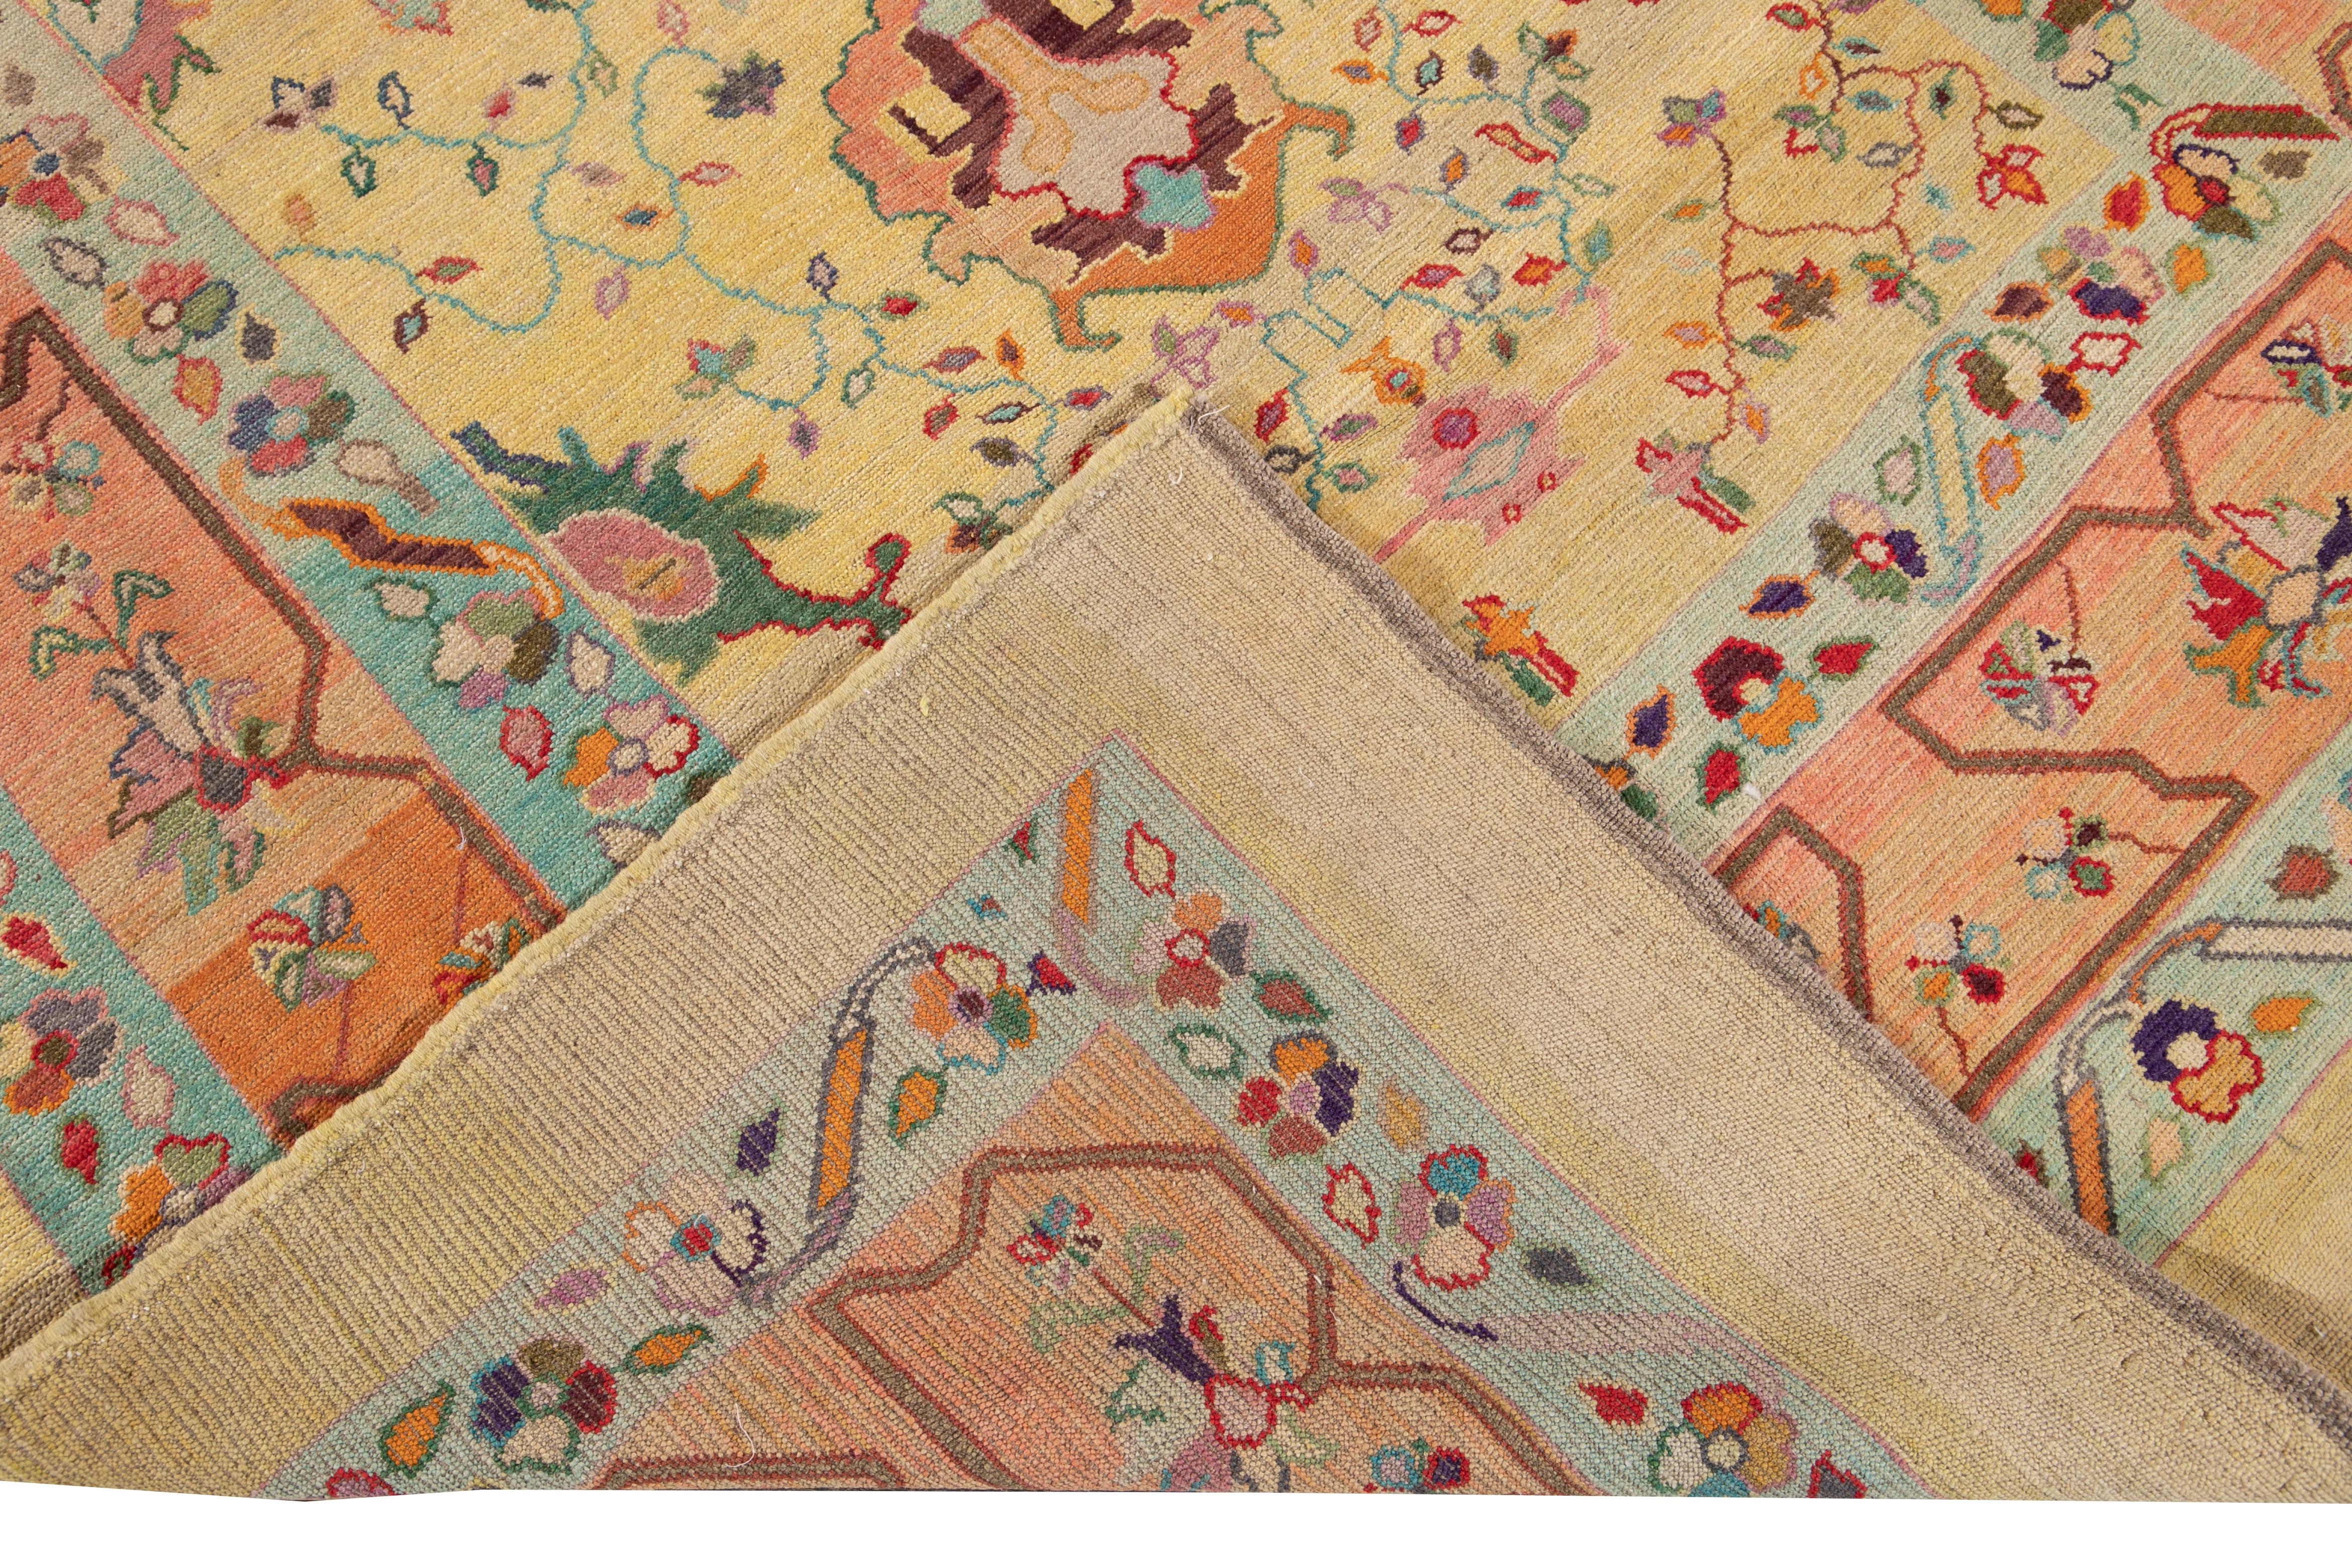 Beautiful modern hand-knotted wool rug with yellow field. This Revival Collection rug has an orange and blue frame and bright multi-color accents all-over a gorgeous geometric Floral design.

This rug measures 6'4